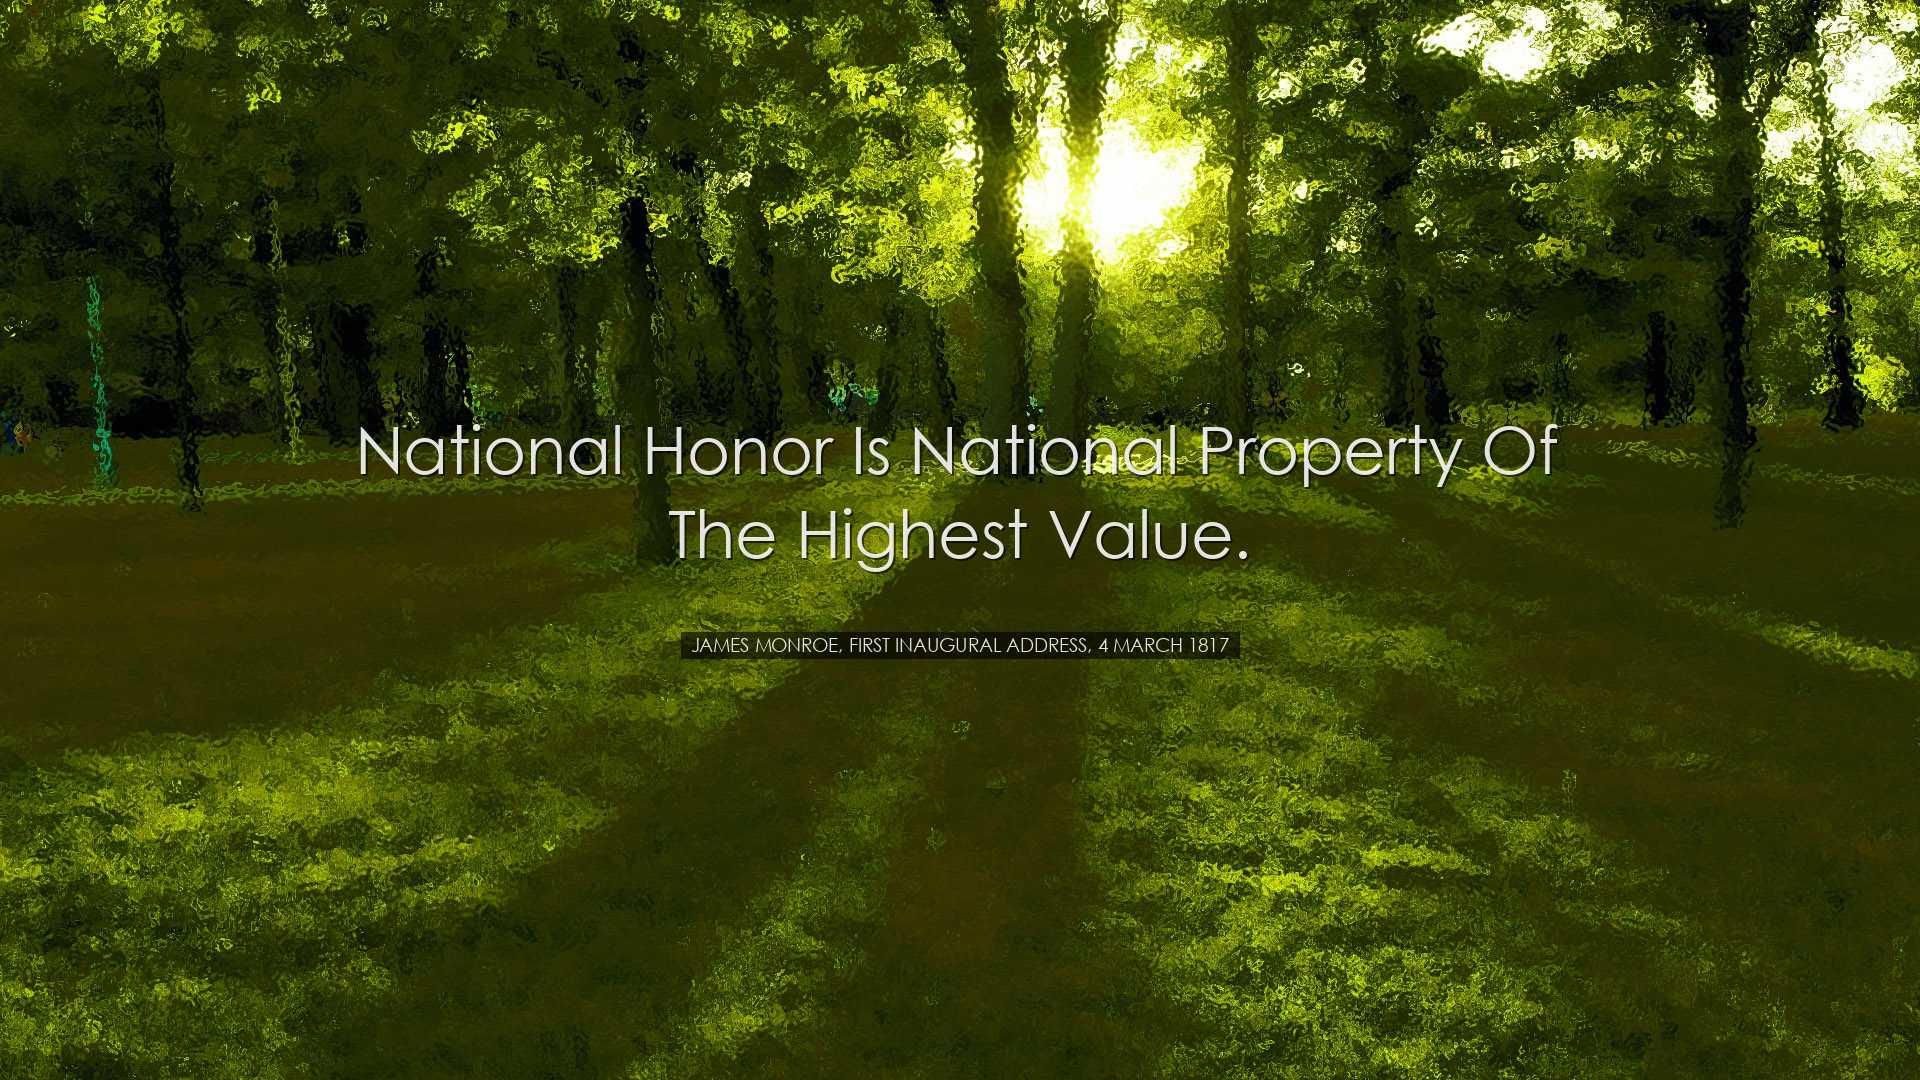 National honor is national property of the highest value. - James